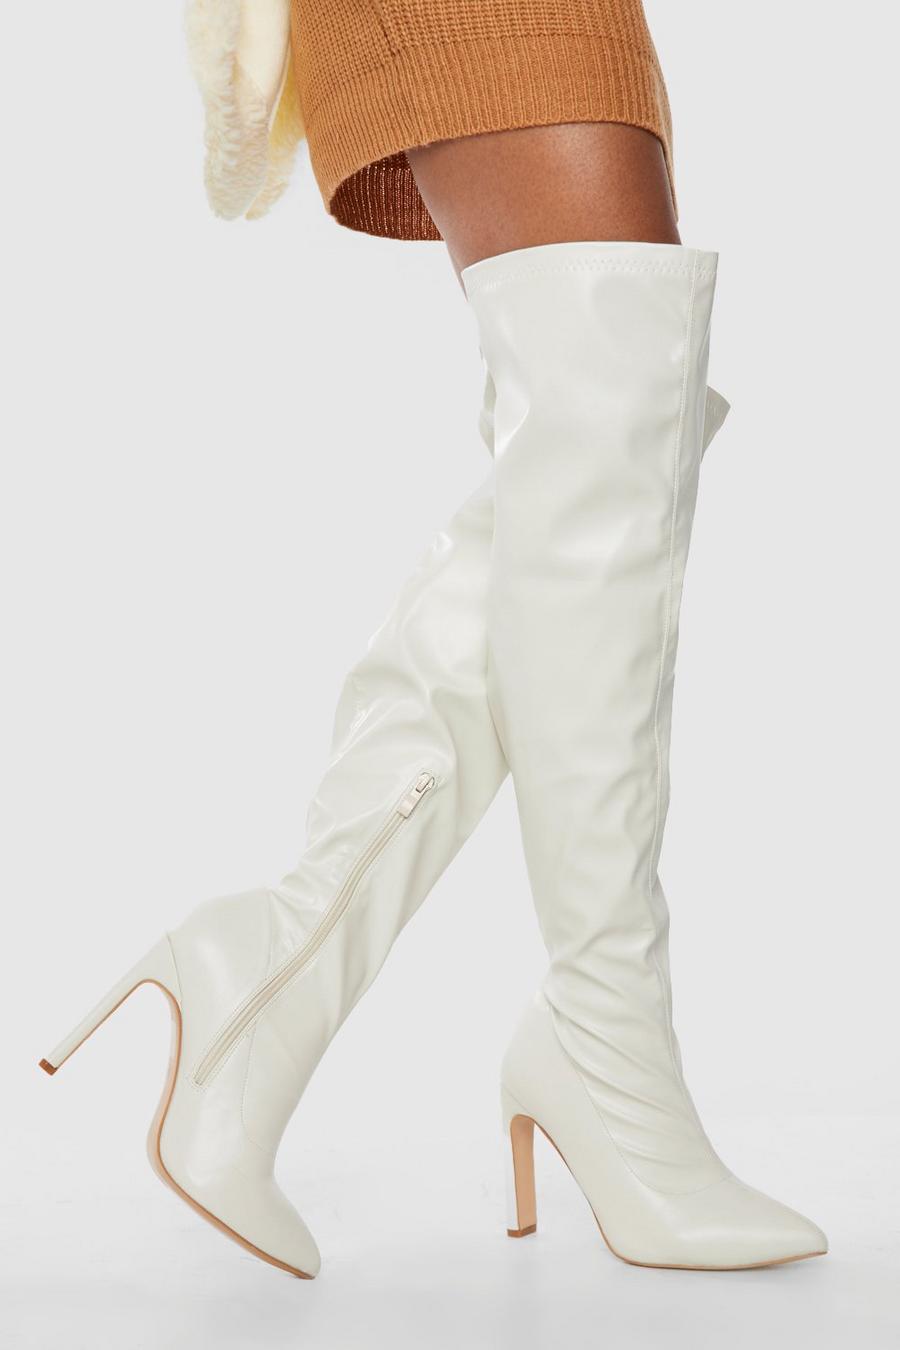 Cream white Wide Width Pointed Toe Pu Over The Knee Boots